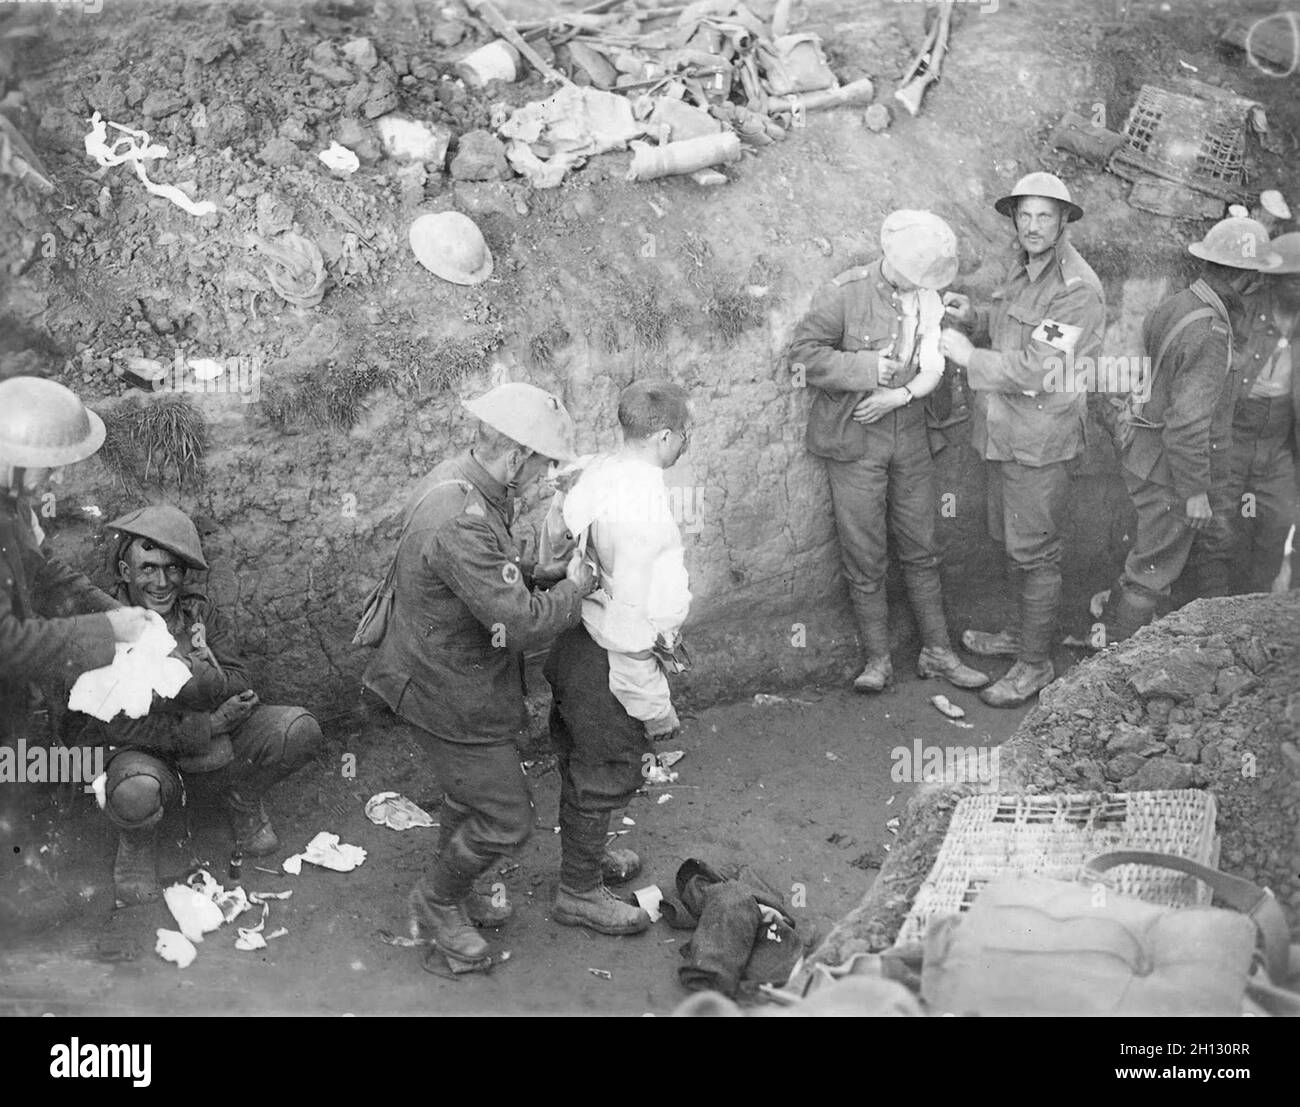 Wounded men beaing treated in a trench in WW1. The man on the left is suffering from shell shock. Stock Photo